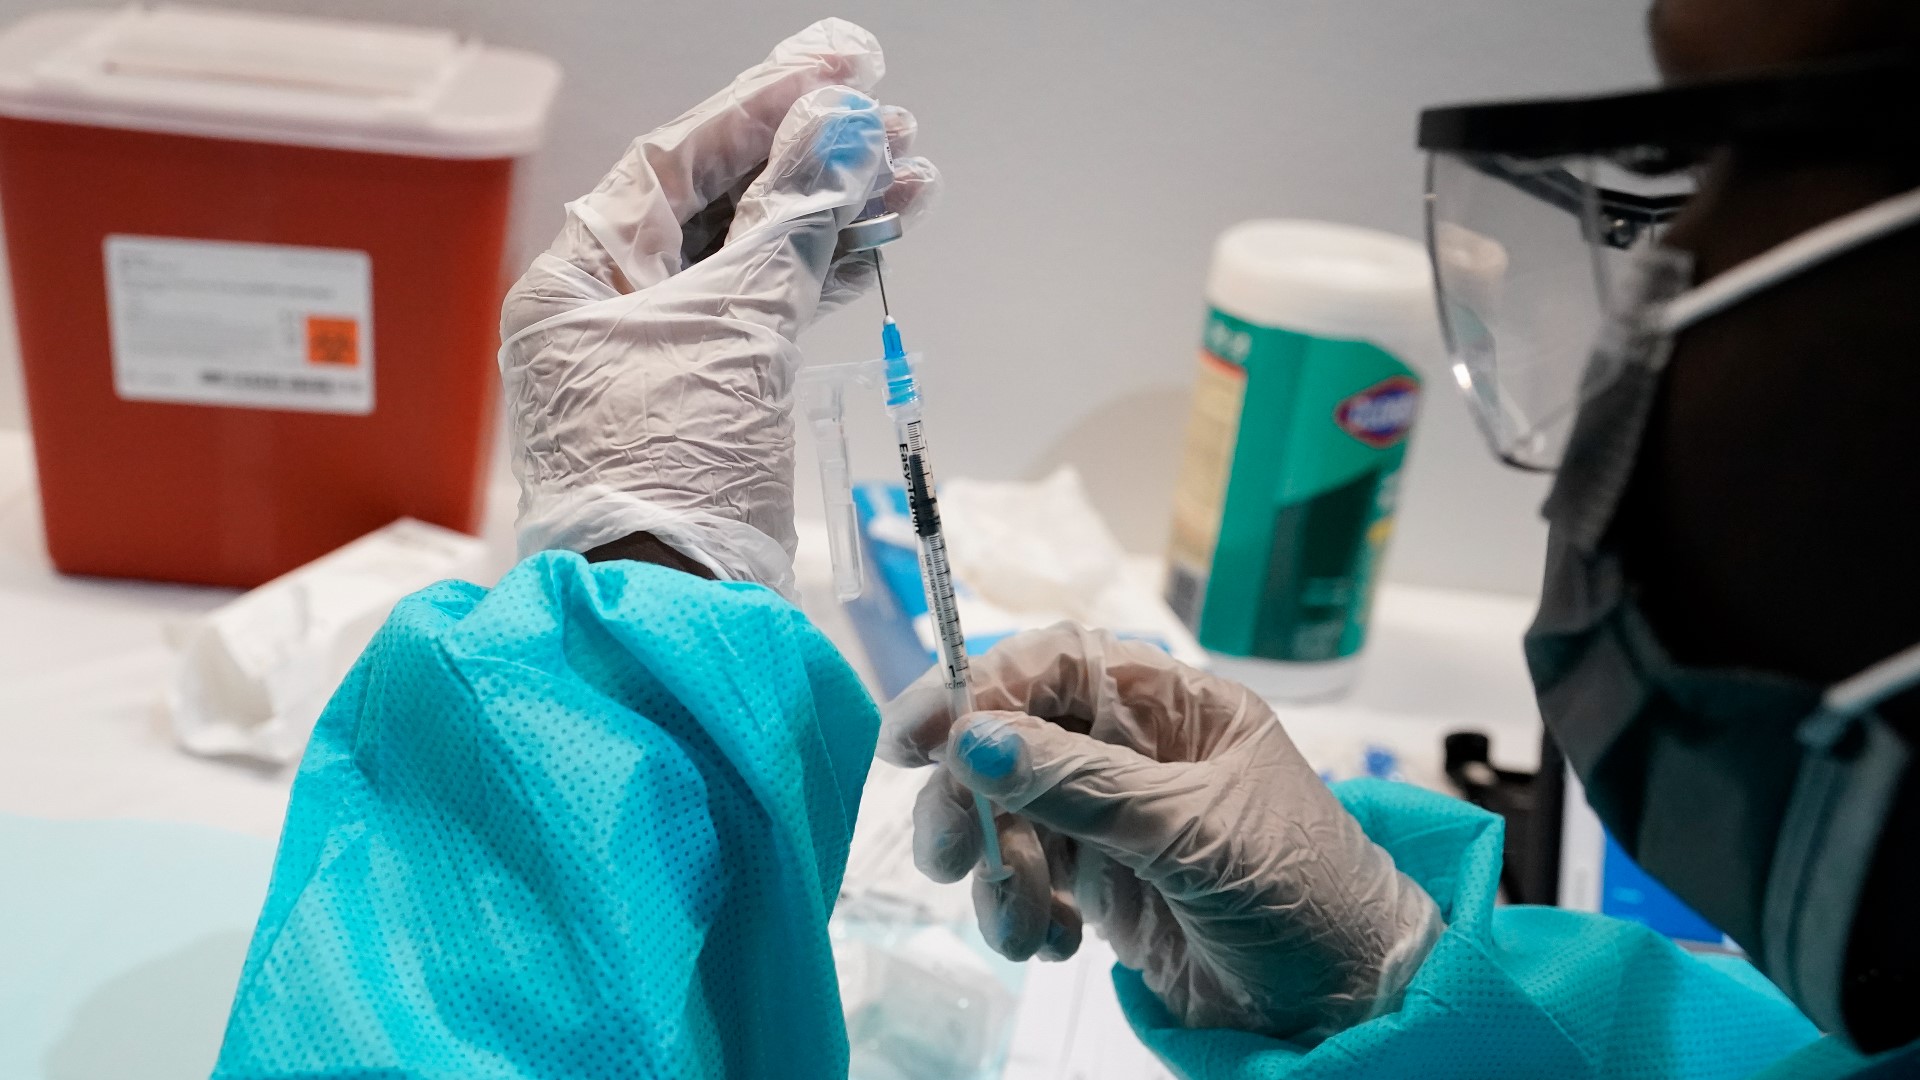 More companies are making vaccines mandatory after the Food and Drug Administration gave full approval to Pfizer's COVID-19 vaccine last month.